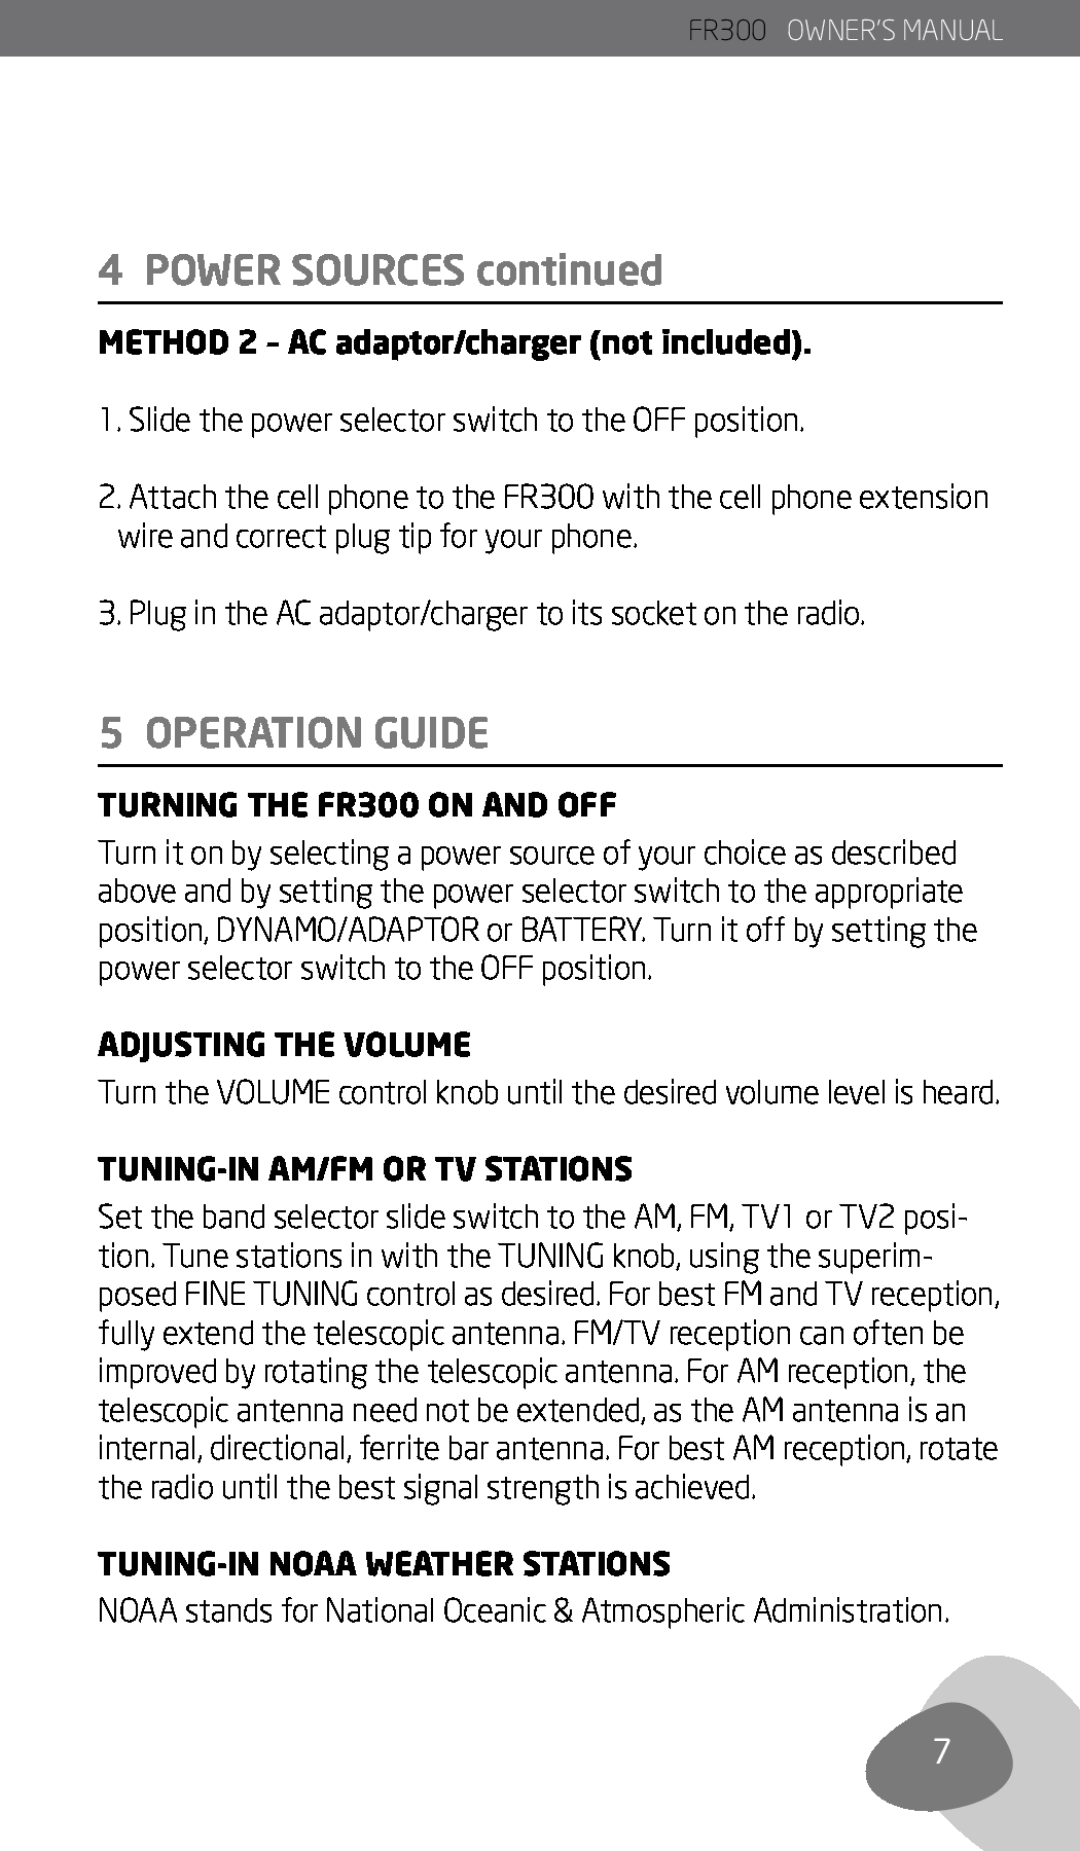 Eton Operation Guide, METHOD 2 – AC adaptor/charger not included, TURNING THE FR300 ON AND OFF, Adjusting The Volume 